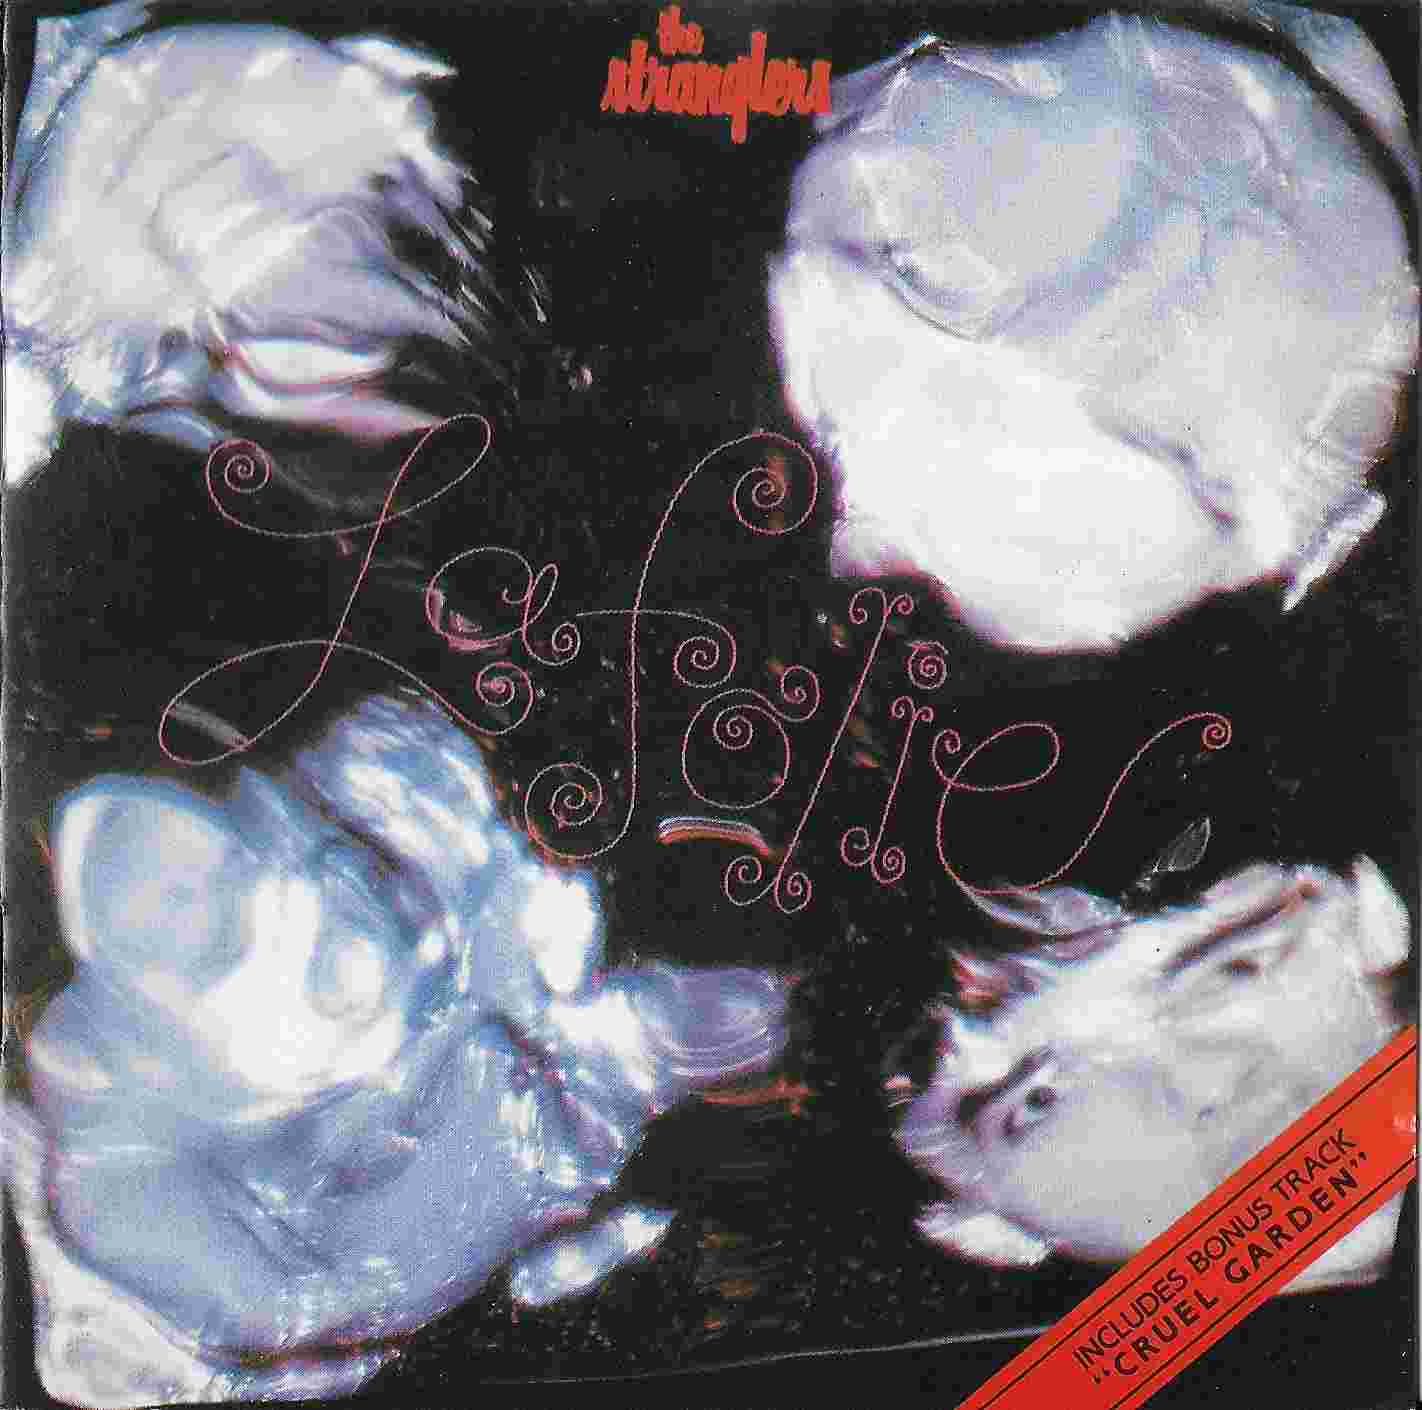 Picture of La folie by artist The Stranglers from The Stranglers cds